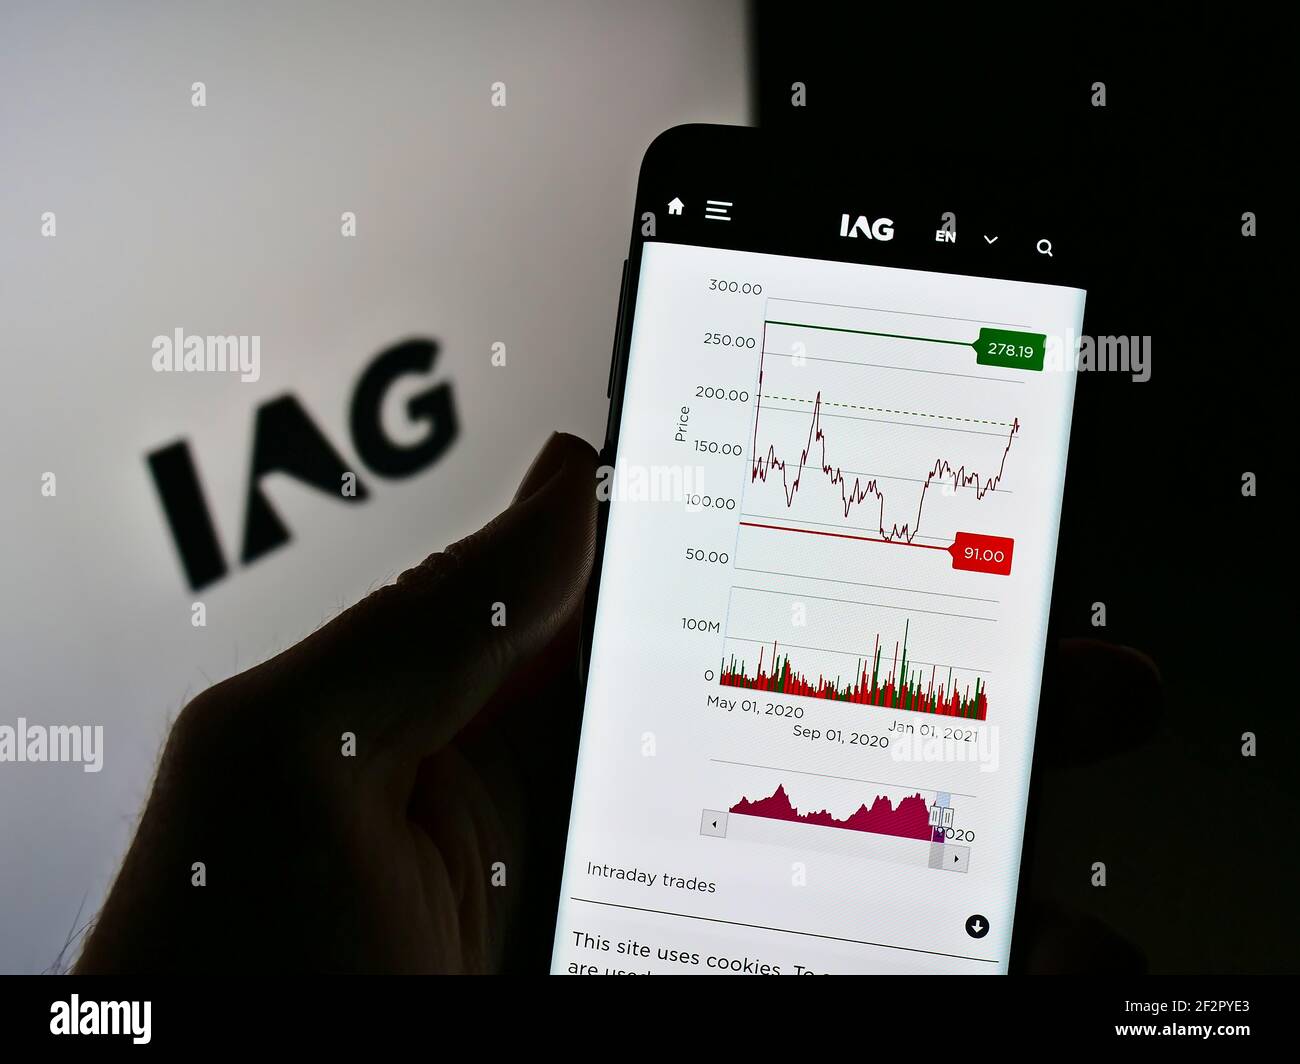 Person holding cellphone with website of company International Airlines Group (IAG) on screen in front of logo. Focus on center of phone display. Stock Photo